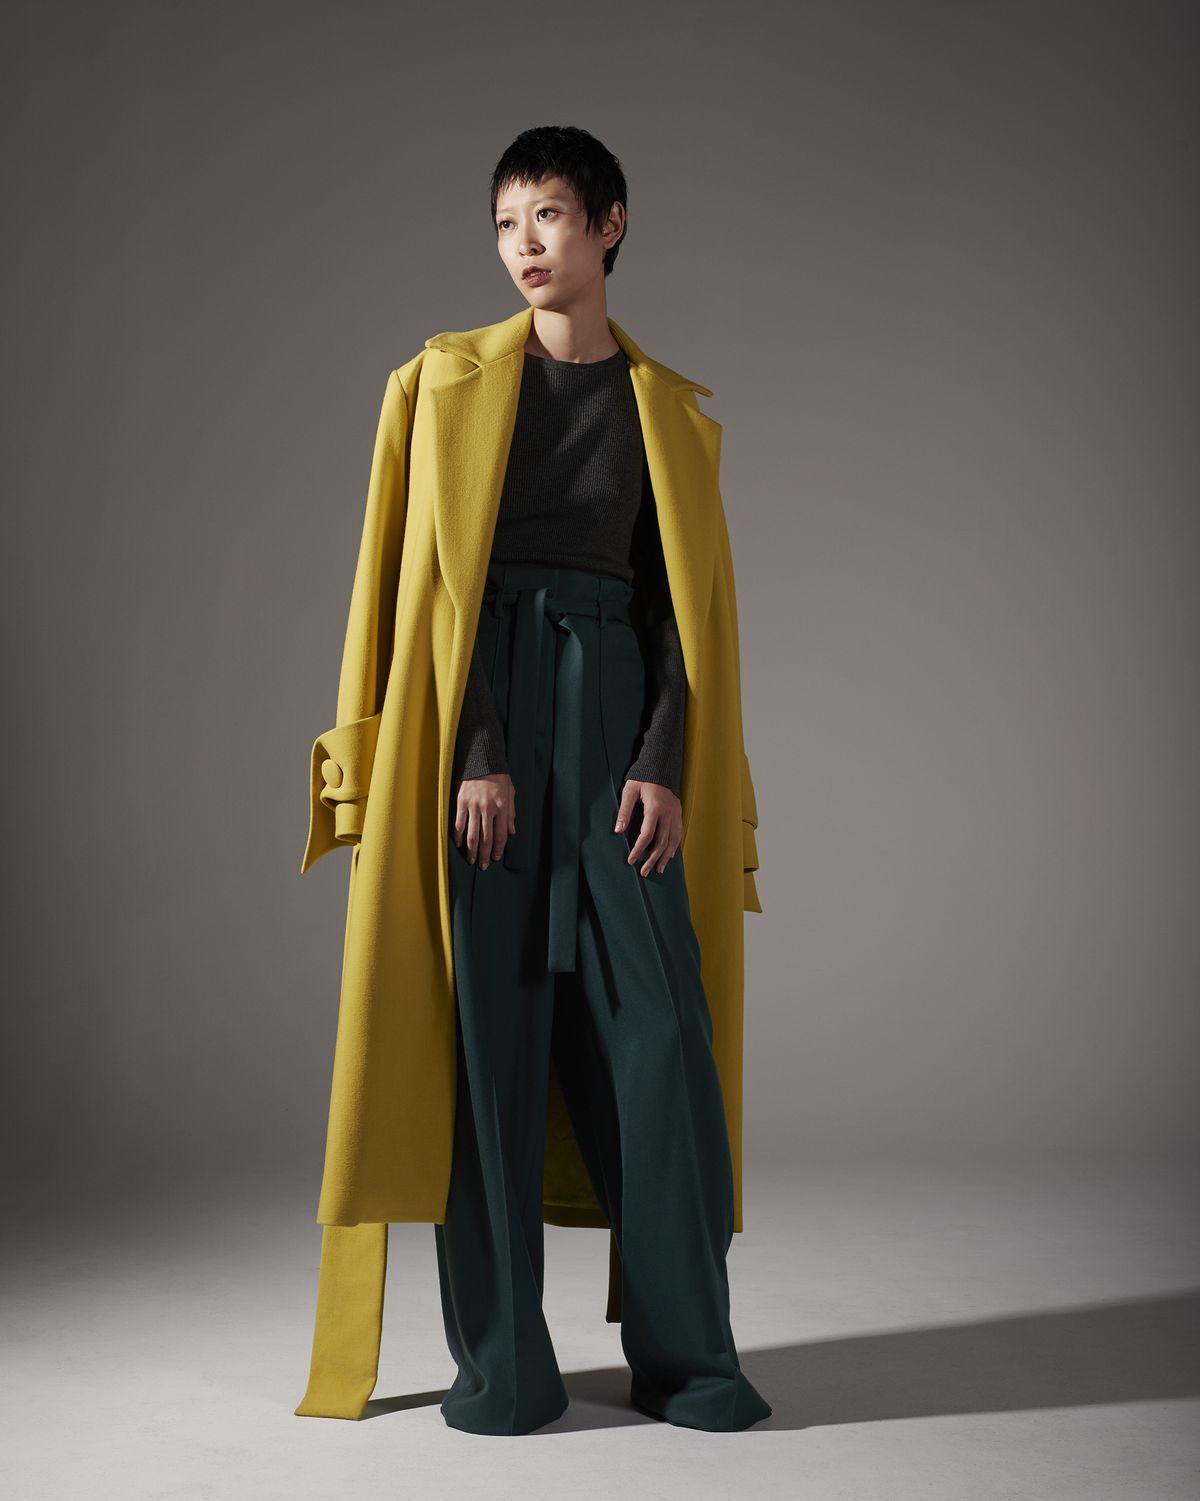 A model with short hair wearing a yellow overcoat and a green shirt